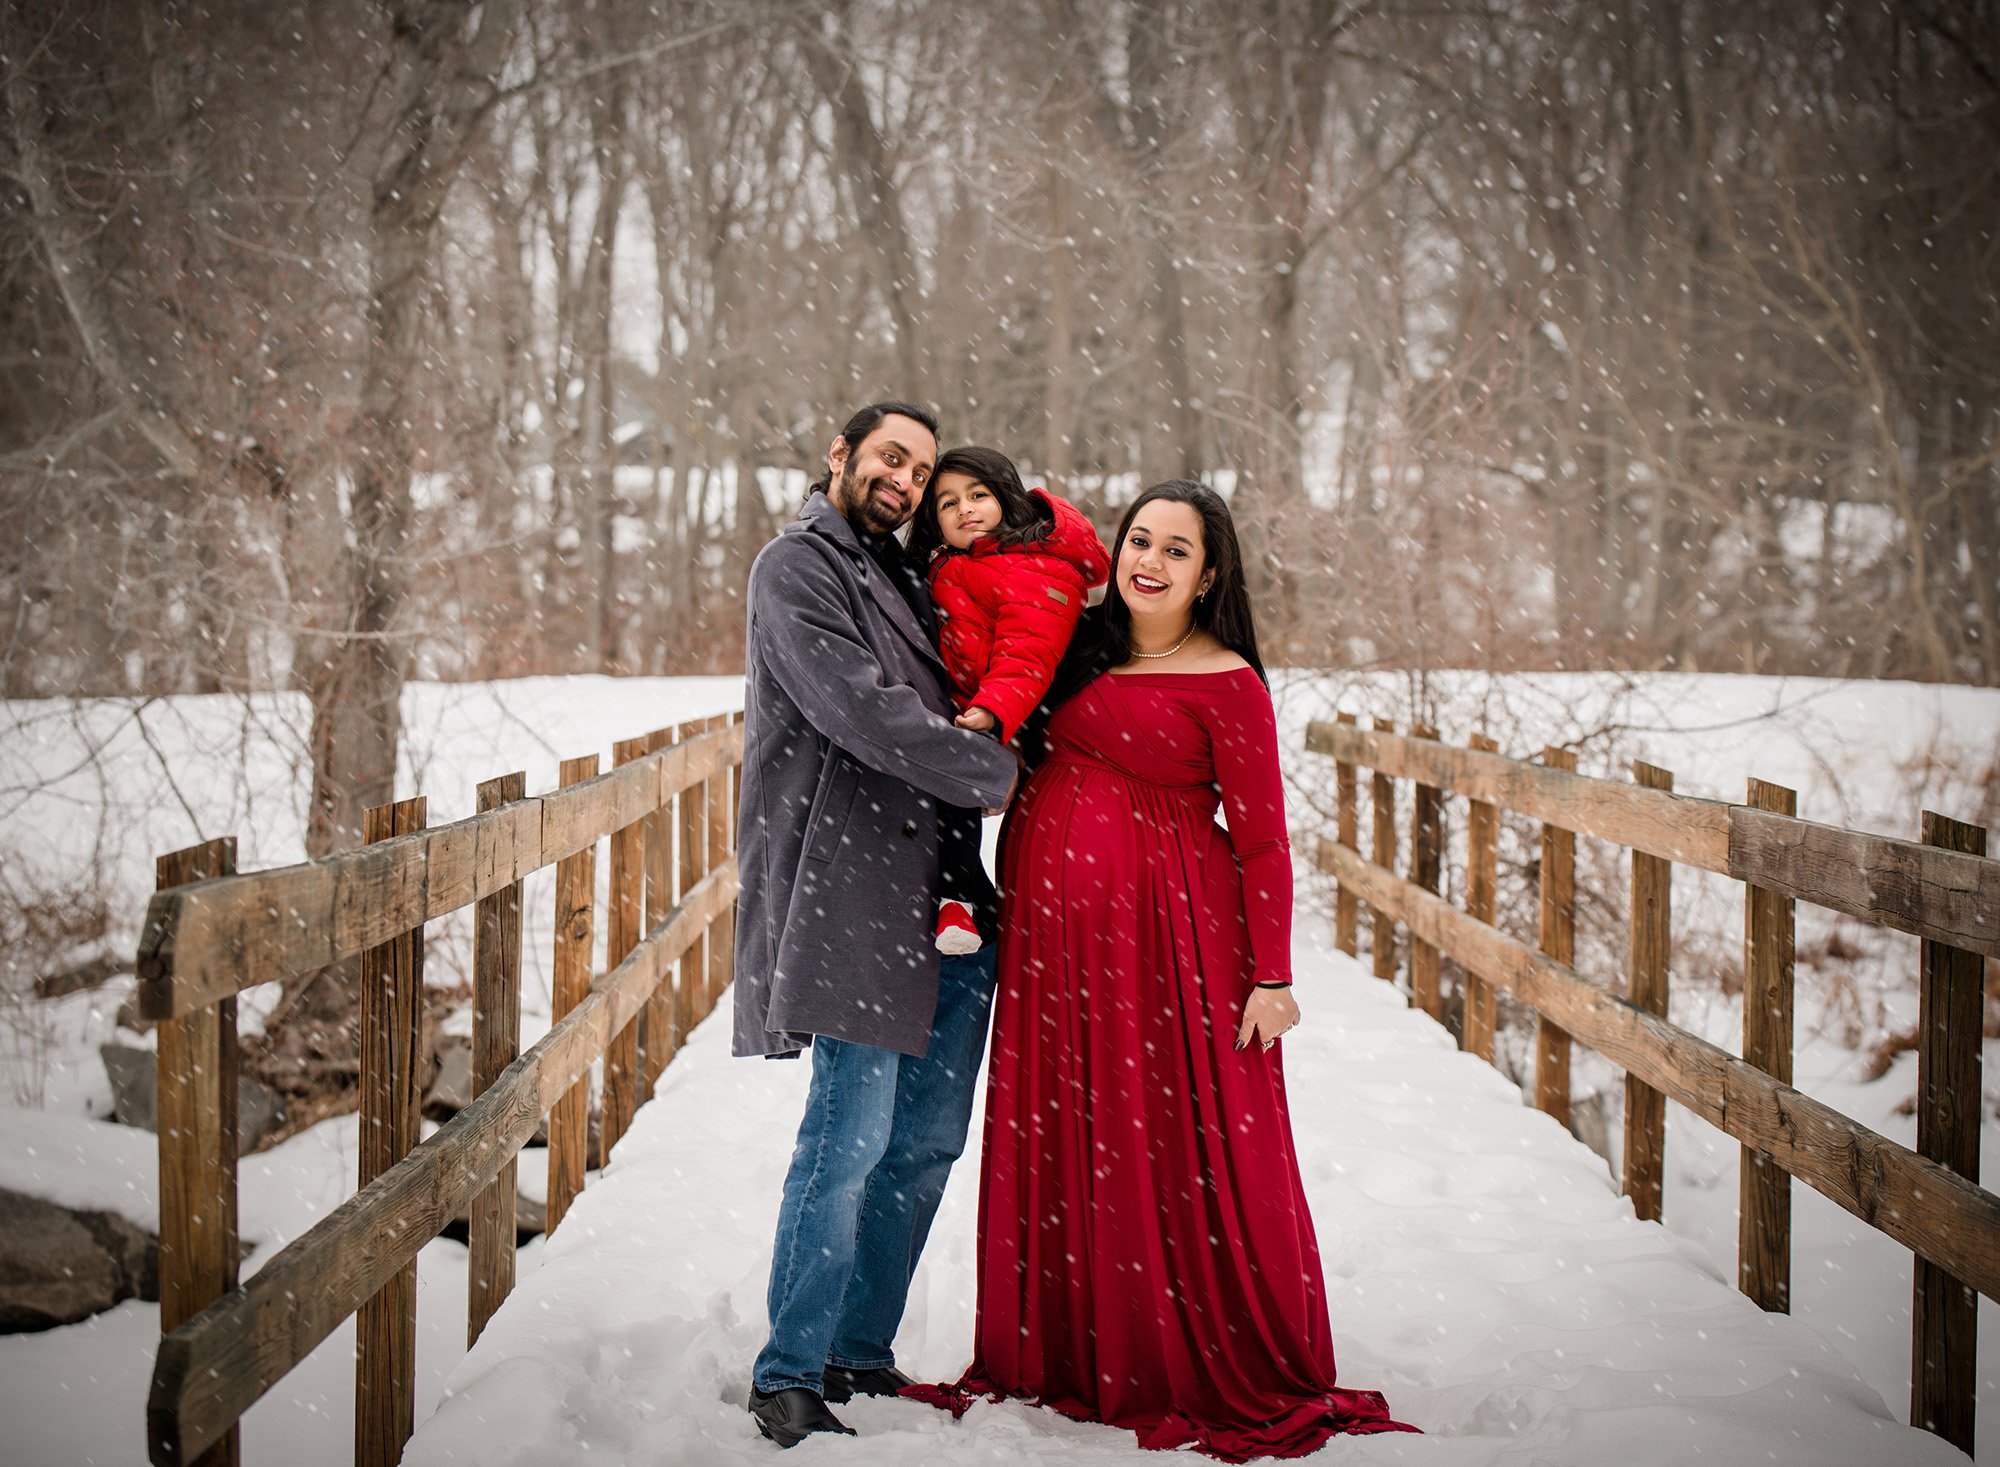 Dreamy Maternity Photos in the Snow